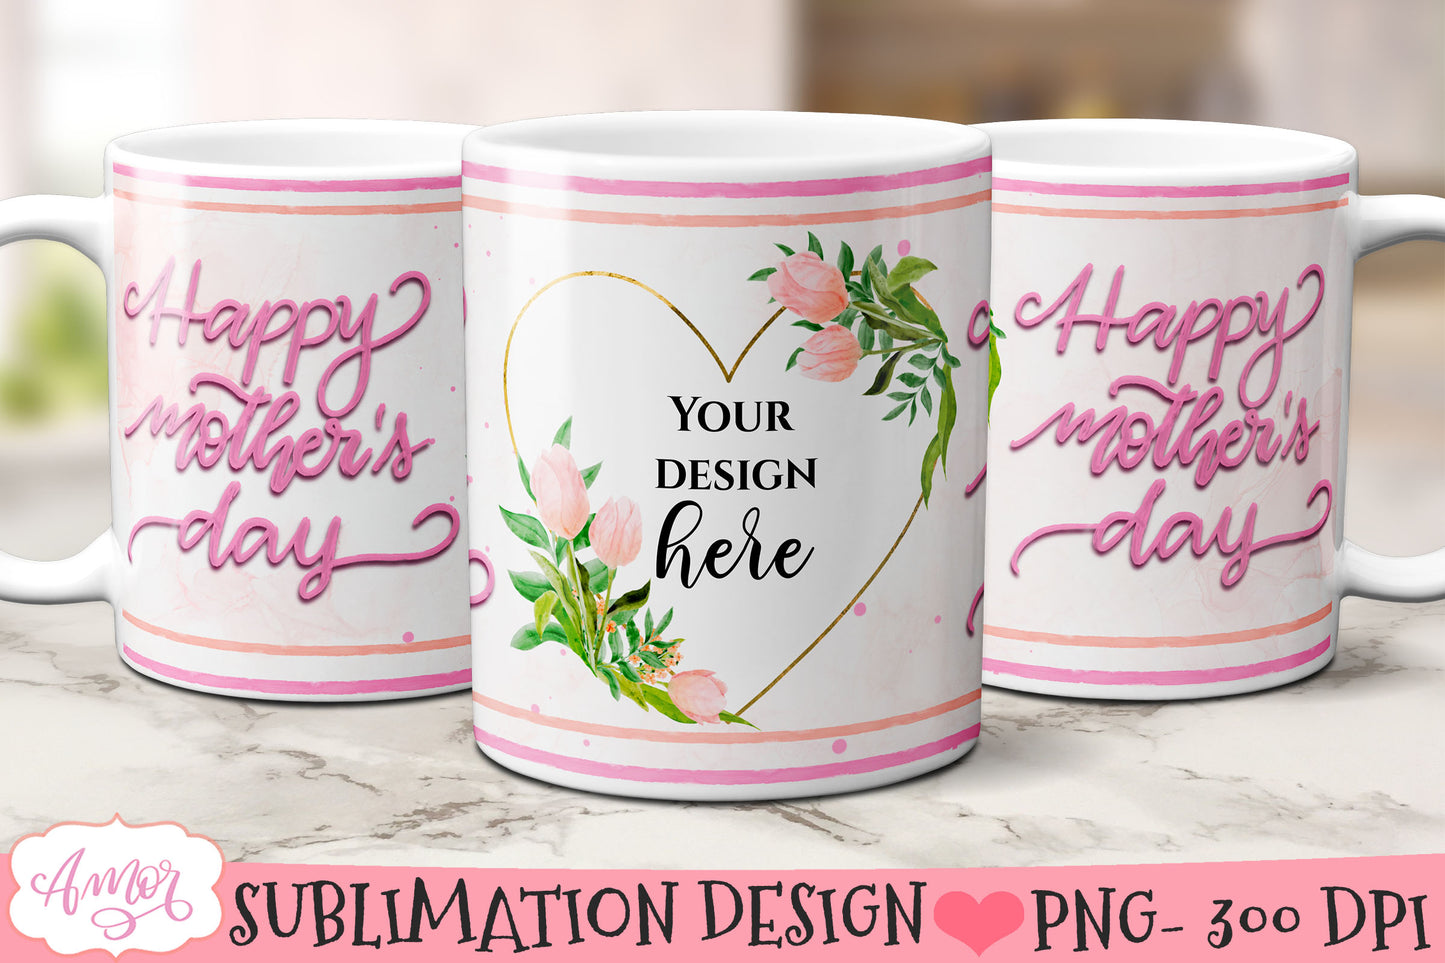 Happy Mother's day mug wraps set for sublimation